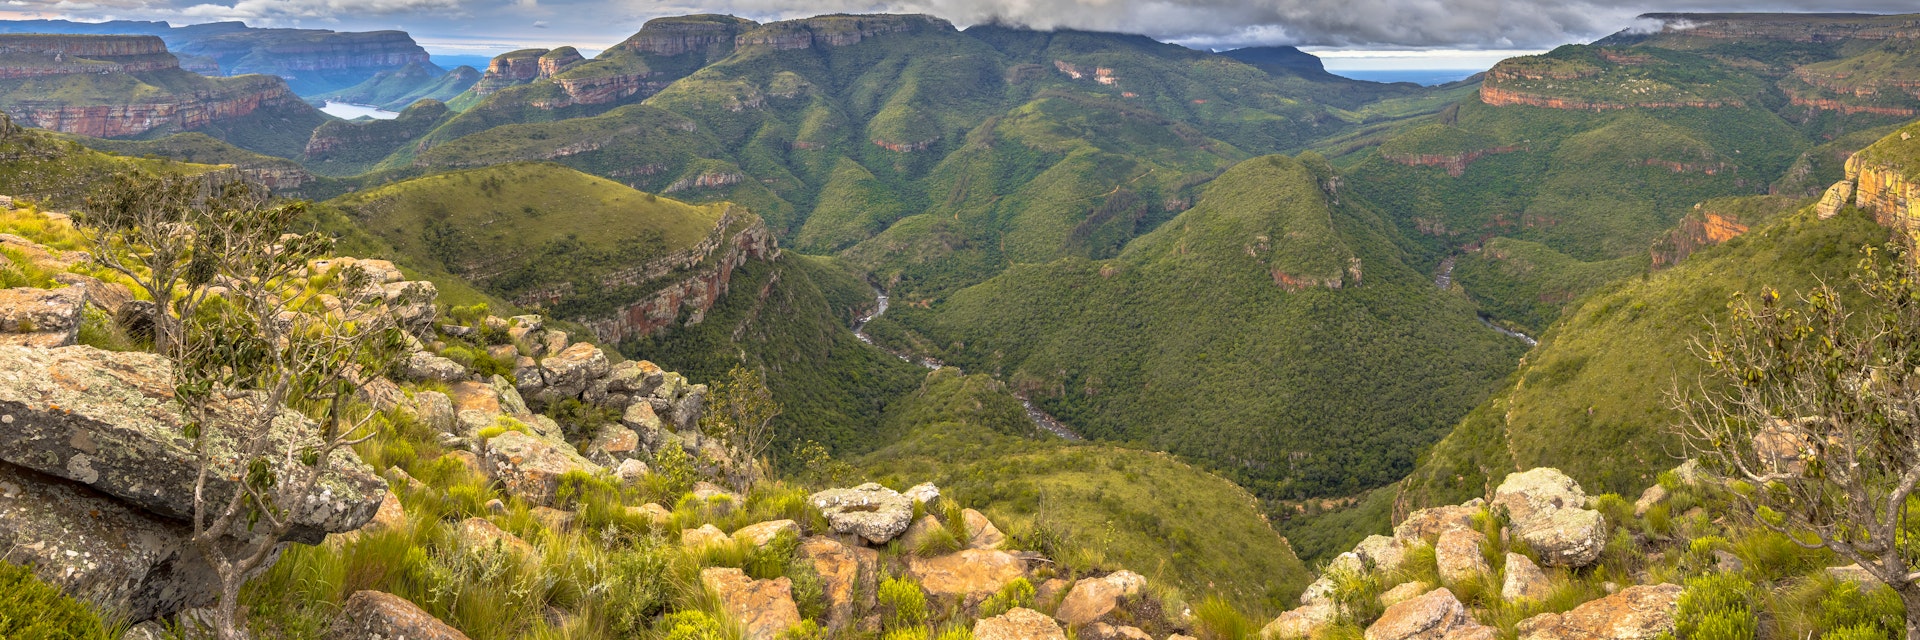 Blyde river Canyon panorama from viewpoint over panoramic scenery in Mpumalanga South Africa